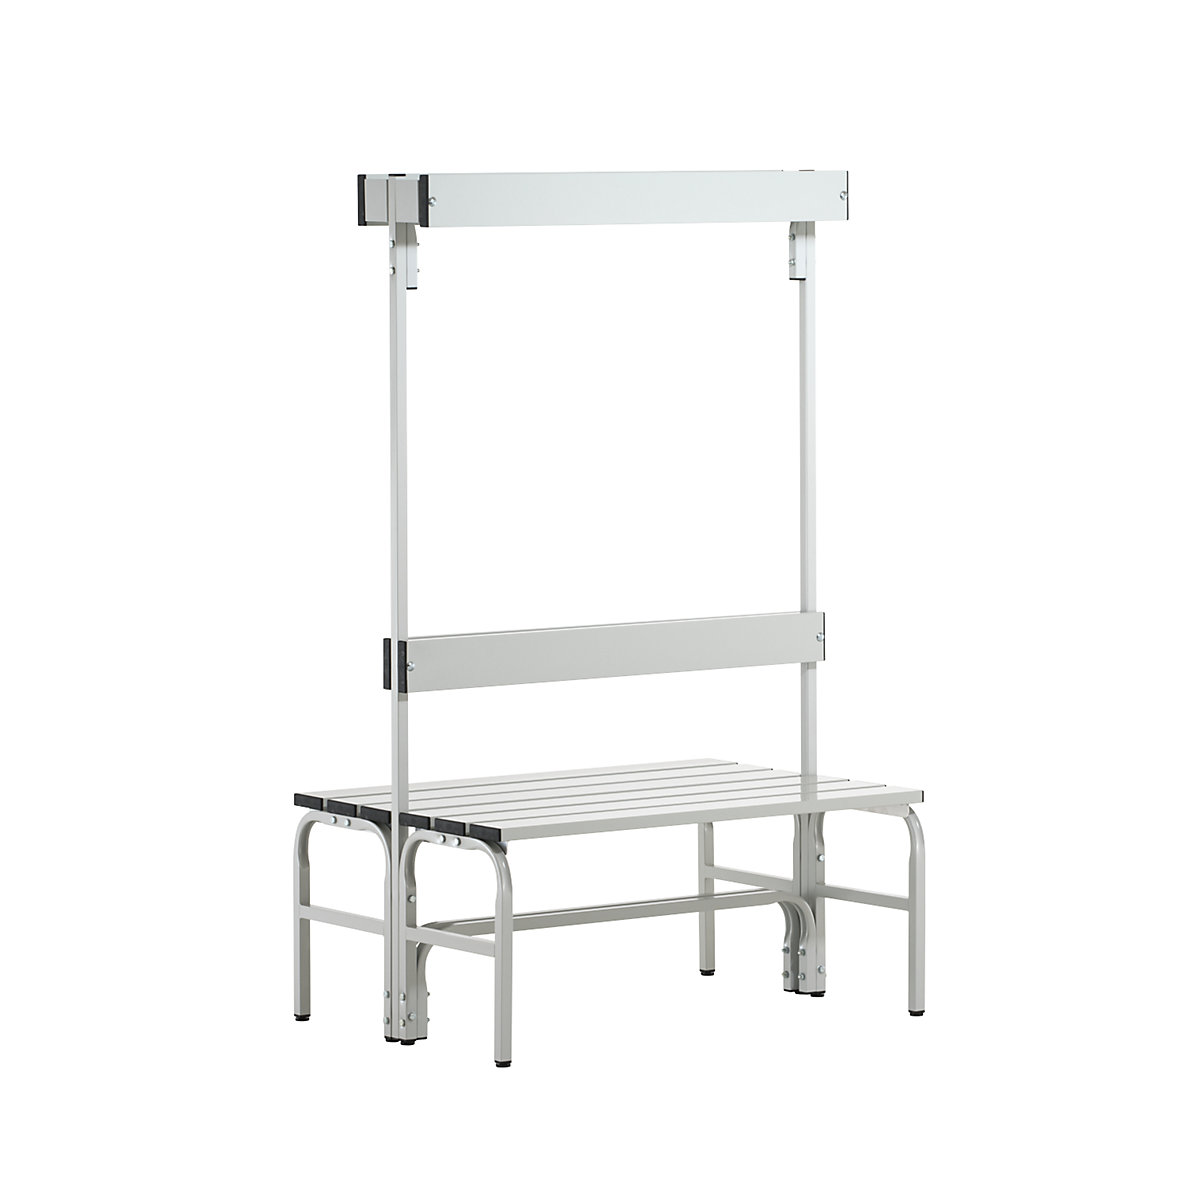 Changing room bench with aluminium slats – Sypro, HxD 1650 x 725 mm, double sided, length 1015 mm, 6 hooks, light grey-7